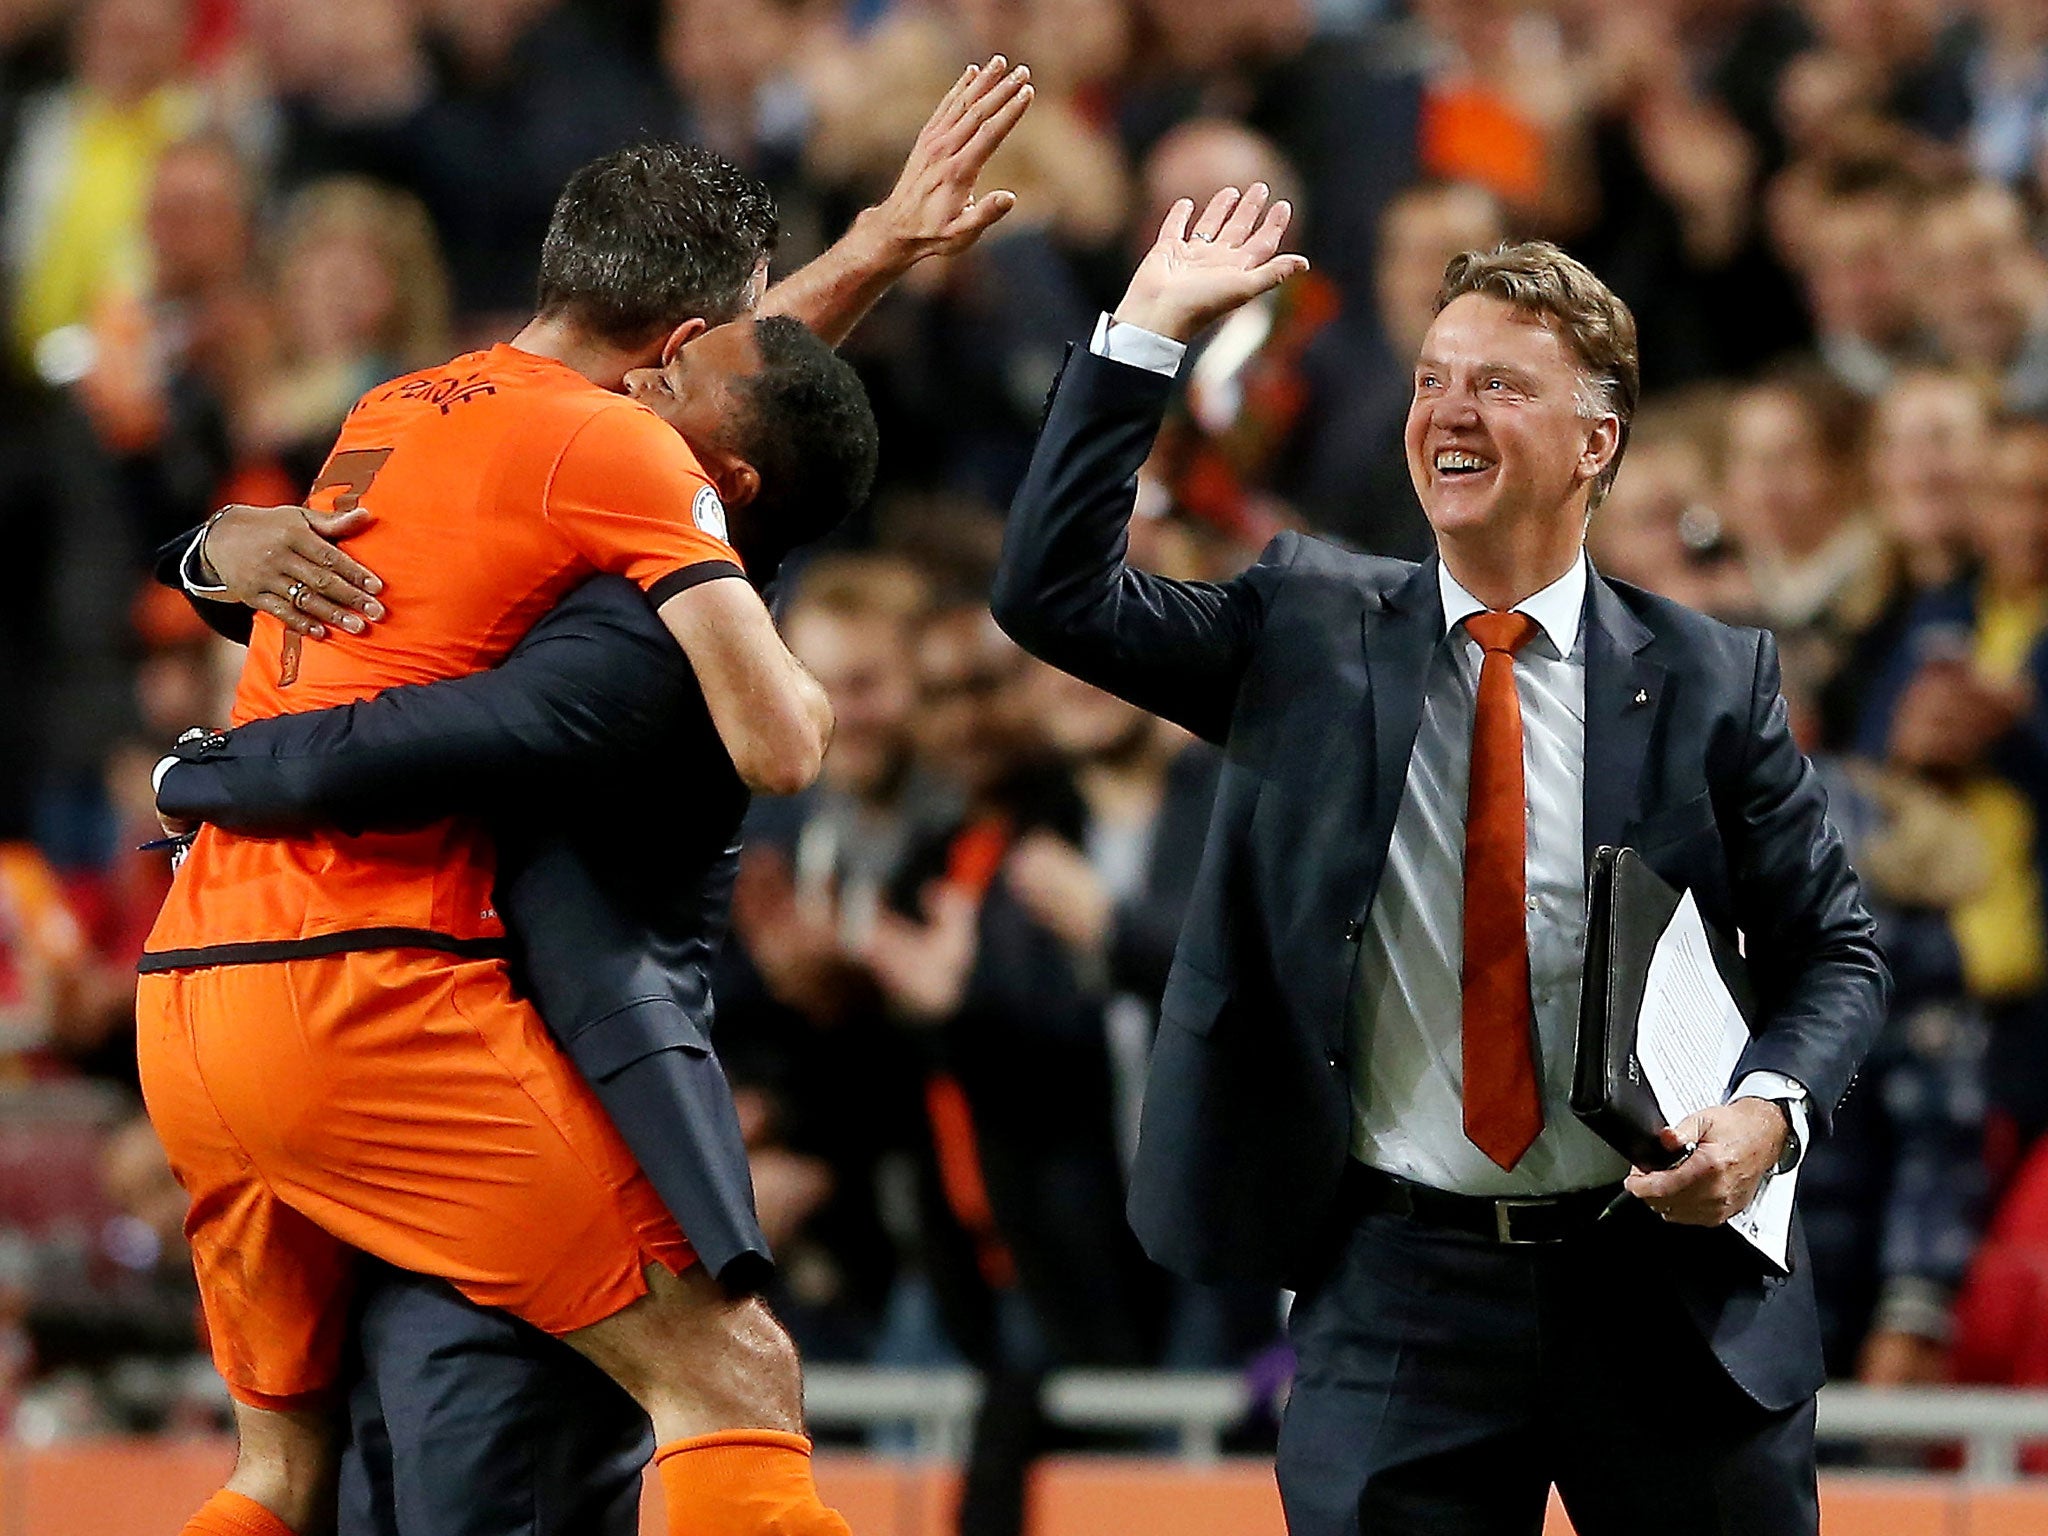 Louis van Gaal (right) celebrates a Netherlands goal with
striker Robin van Persie last year. The pair could be reunited at Old Trafford